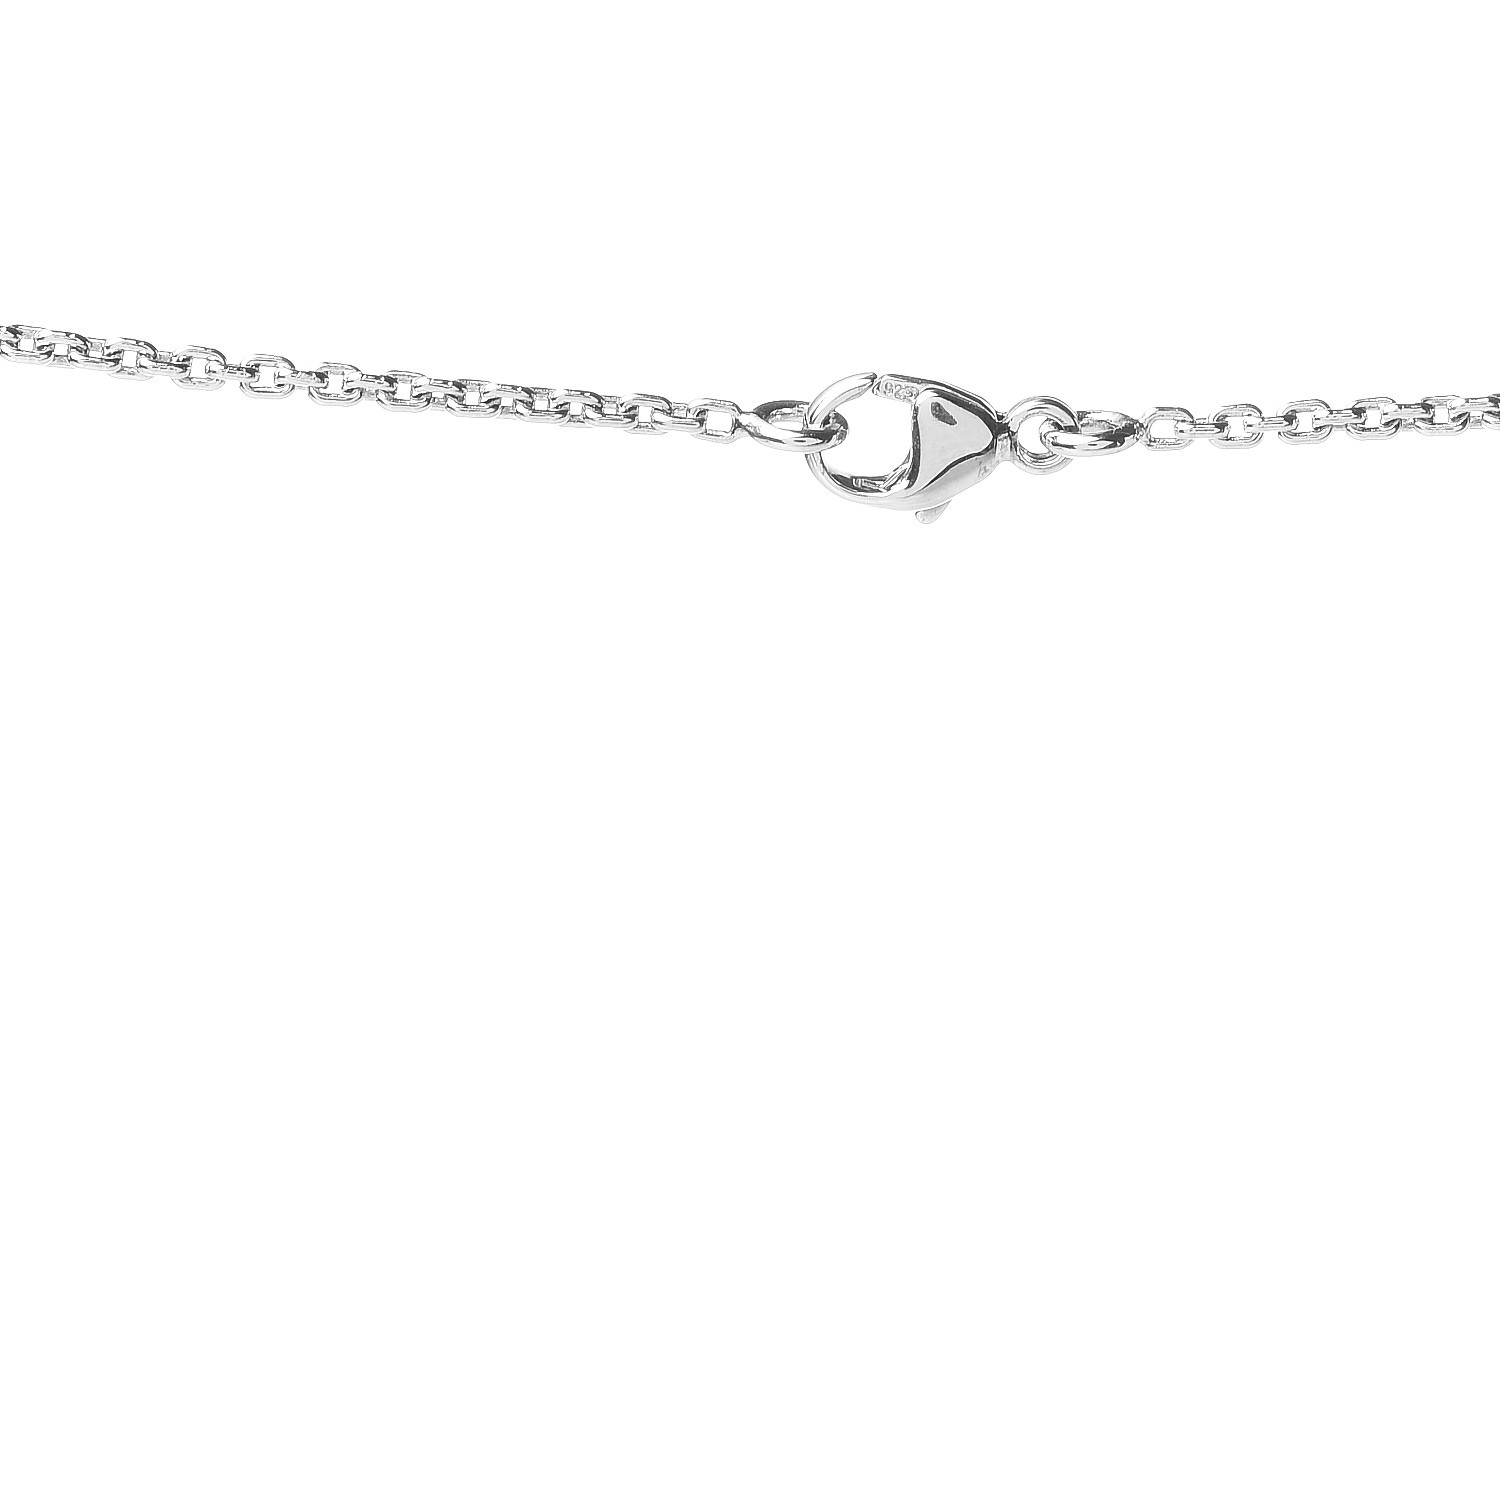 LOUIS VUITTON Sterling Silver Lockit Necklace 531140